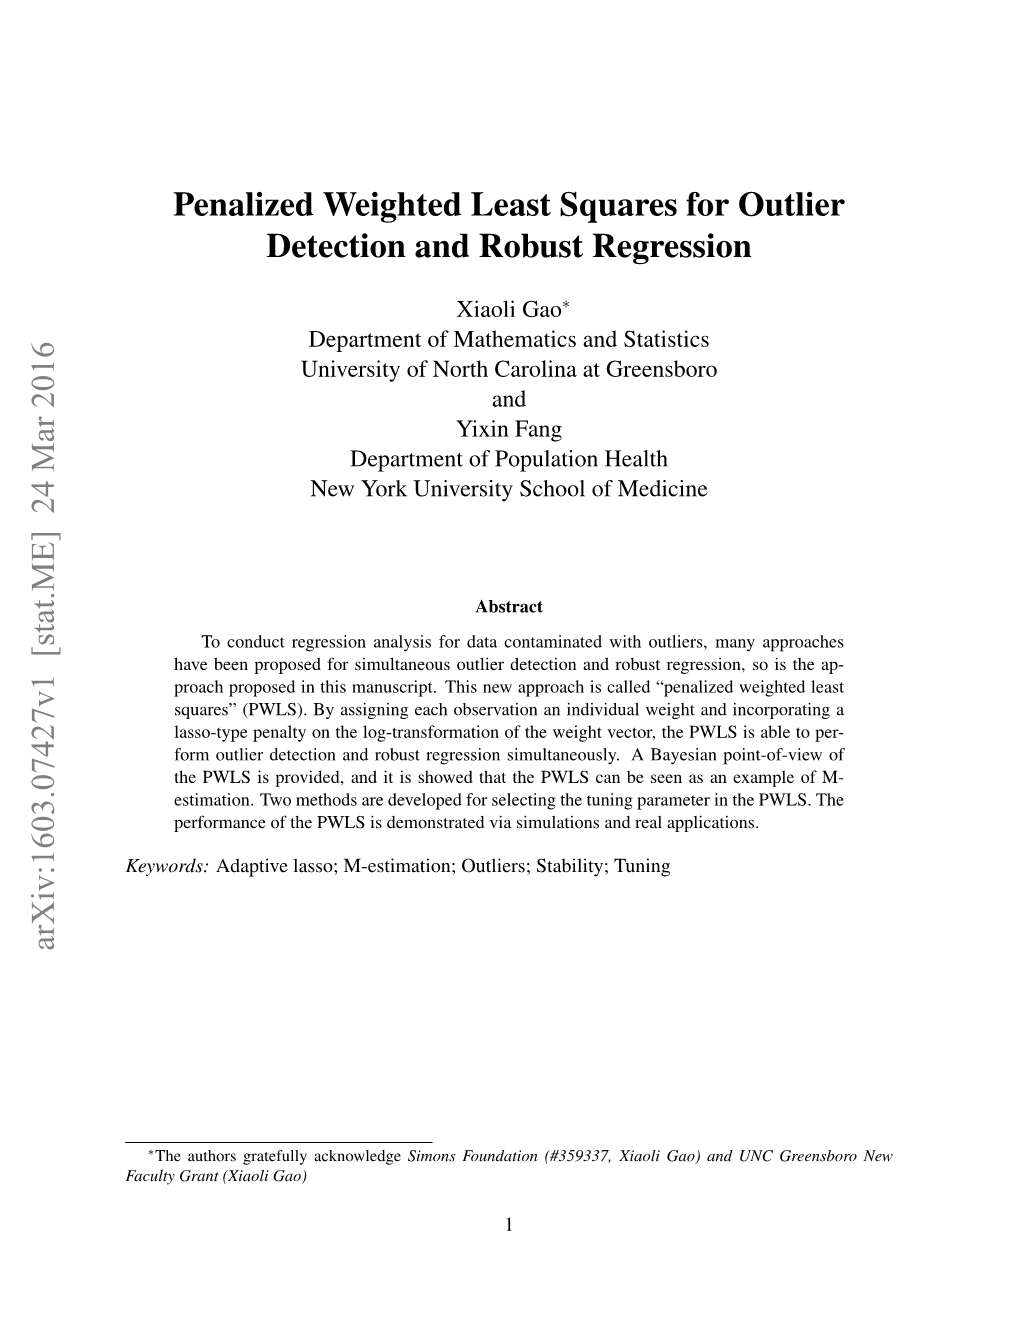 Penalized Weighted Least Squares for Outlier Detection and Robust Regression